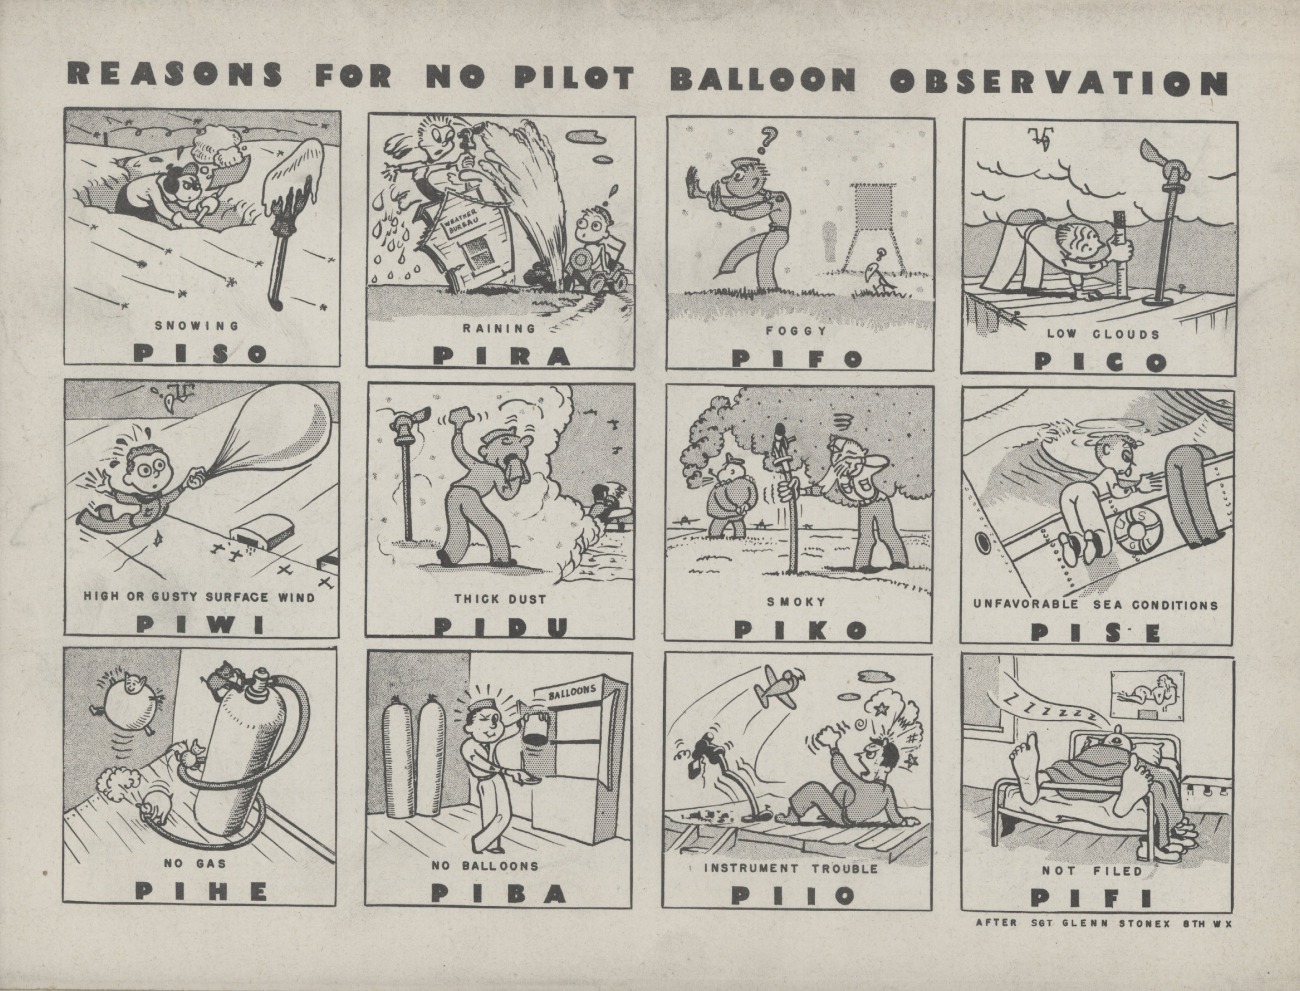 Cartoon showing Reasons for no pilot balloon observations